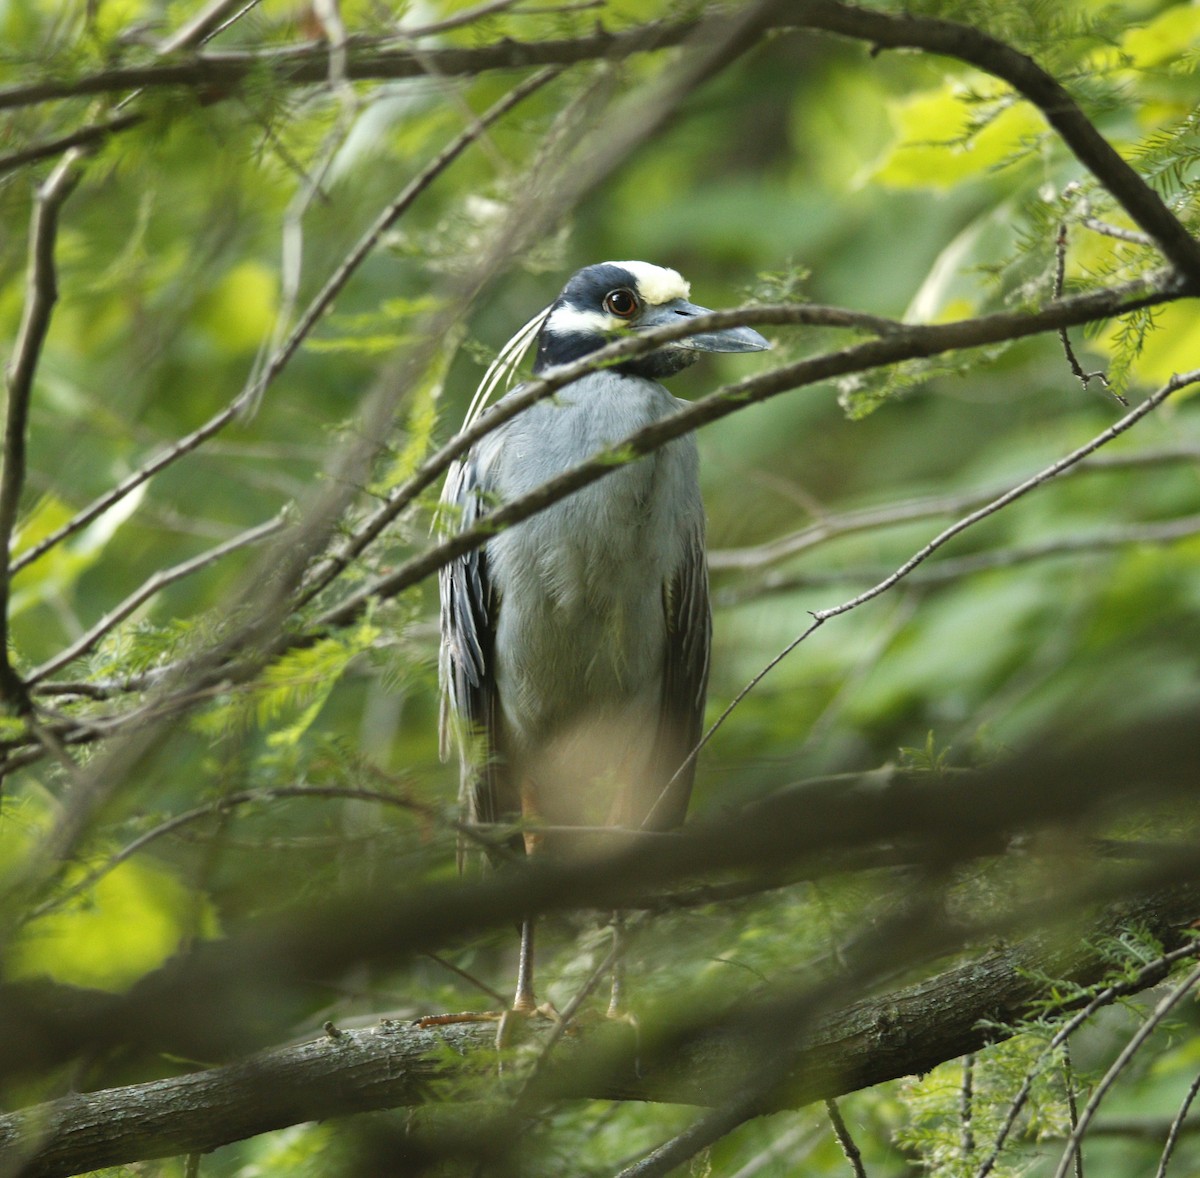 Yellow-crowned Night Heron - Becky Lutz